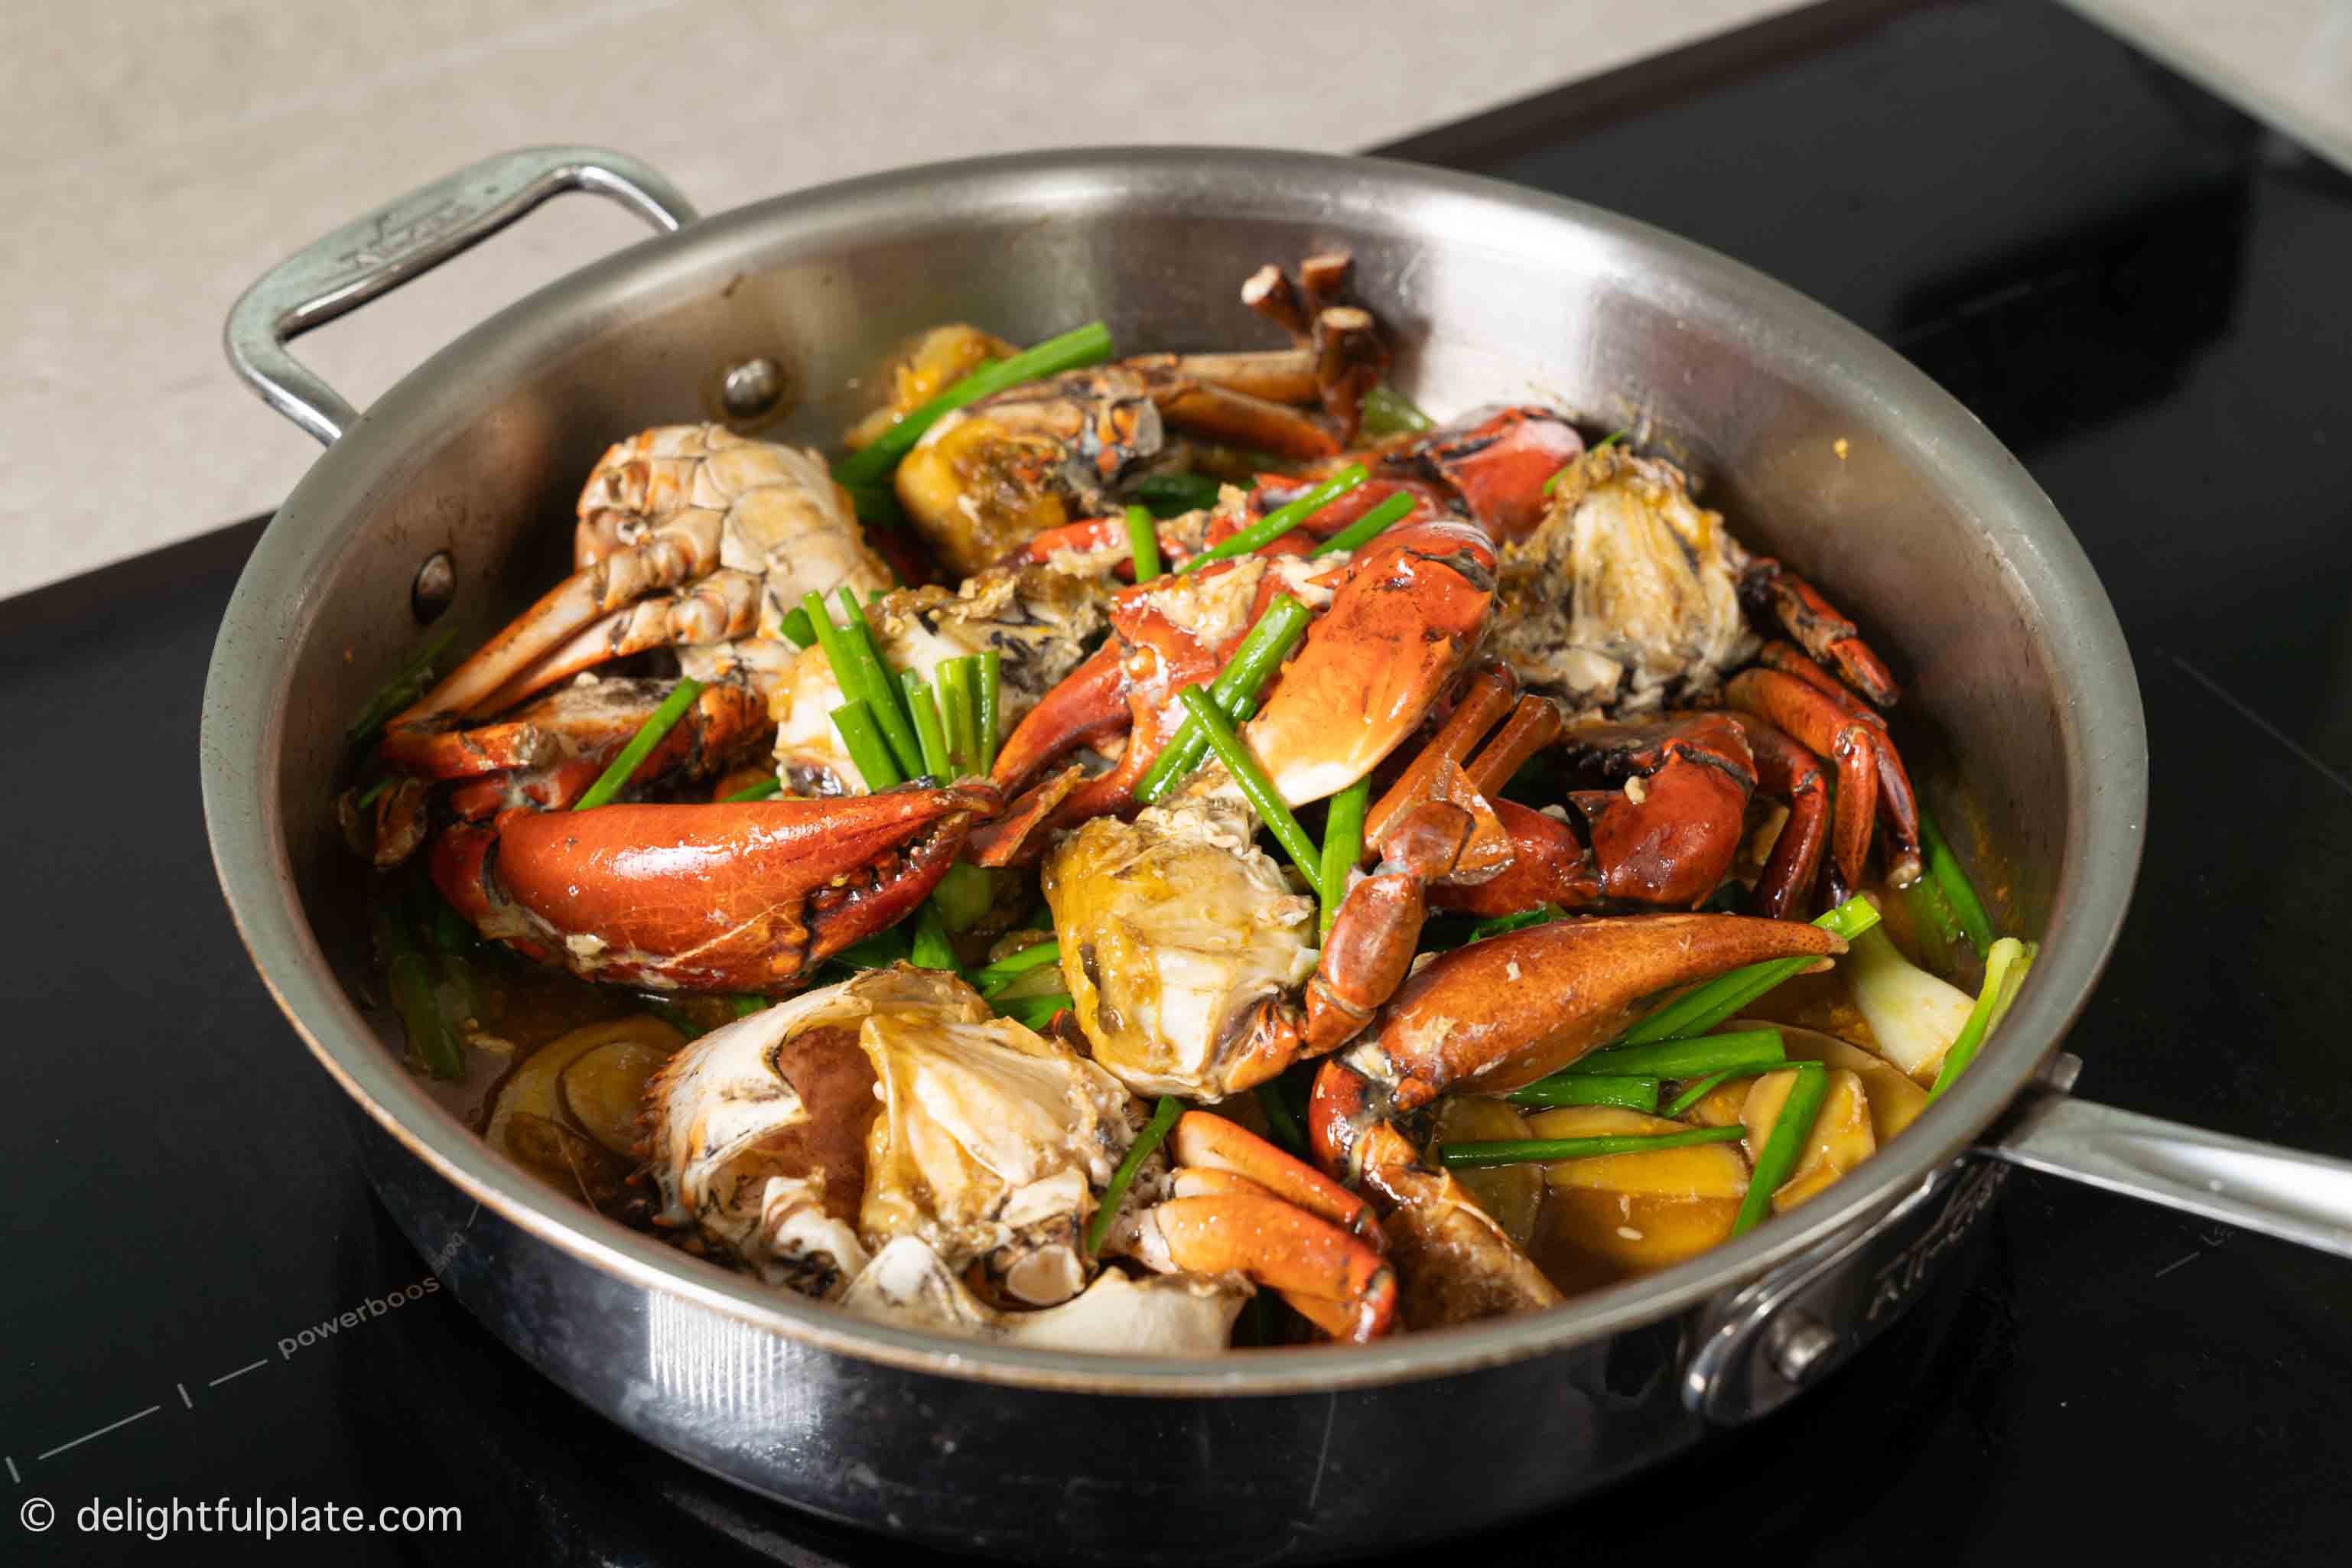 a skillet of freshly-cooked stir-fried crab with ginger and scallion.